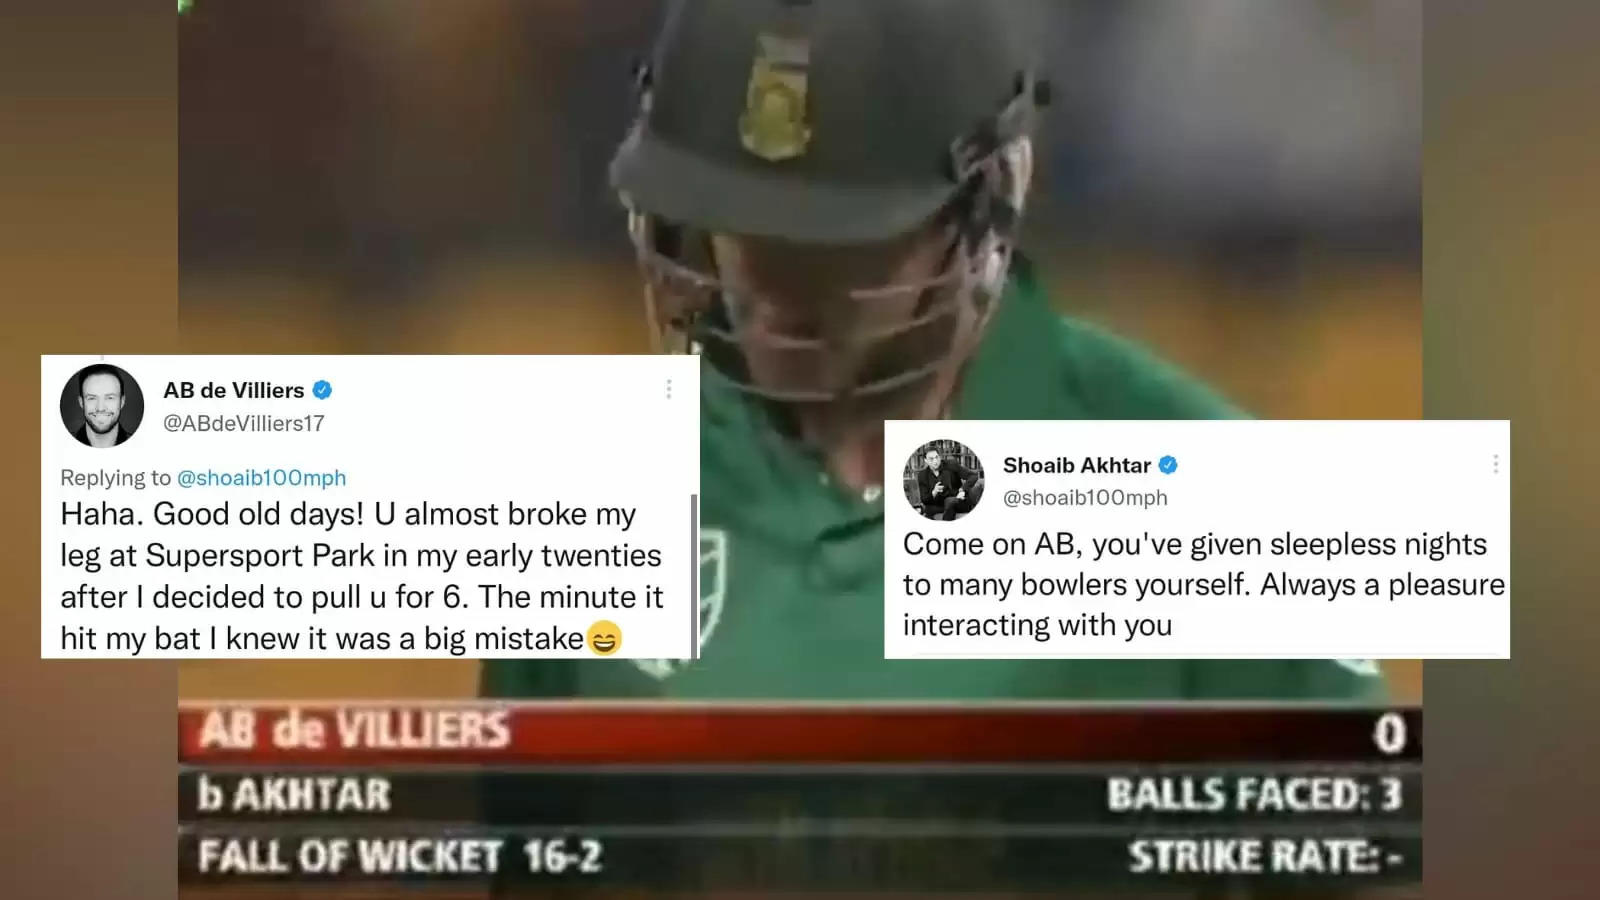 Shoaib Akhtar and AB de Villiers engage in a fun banter